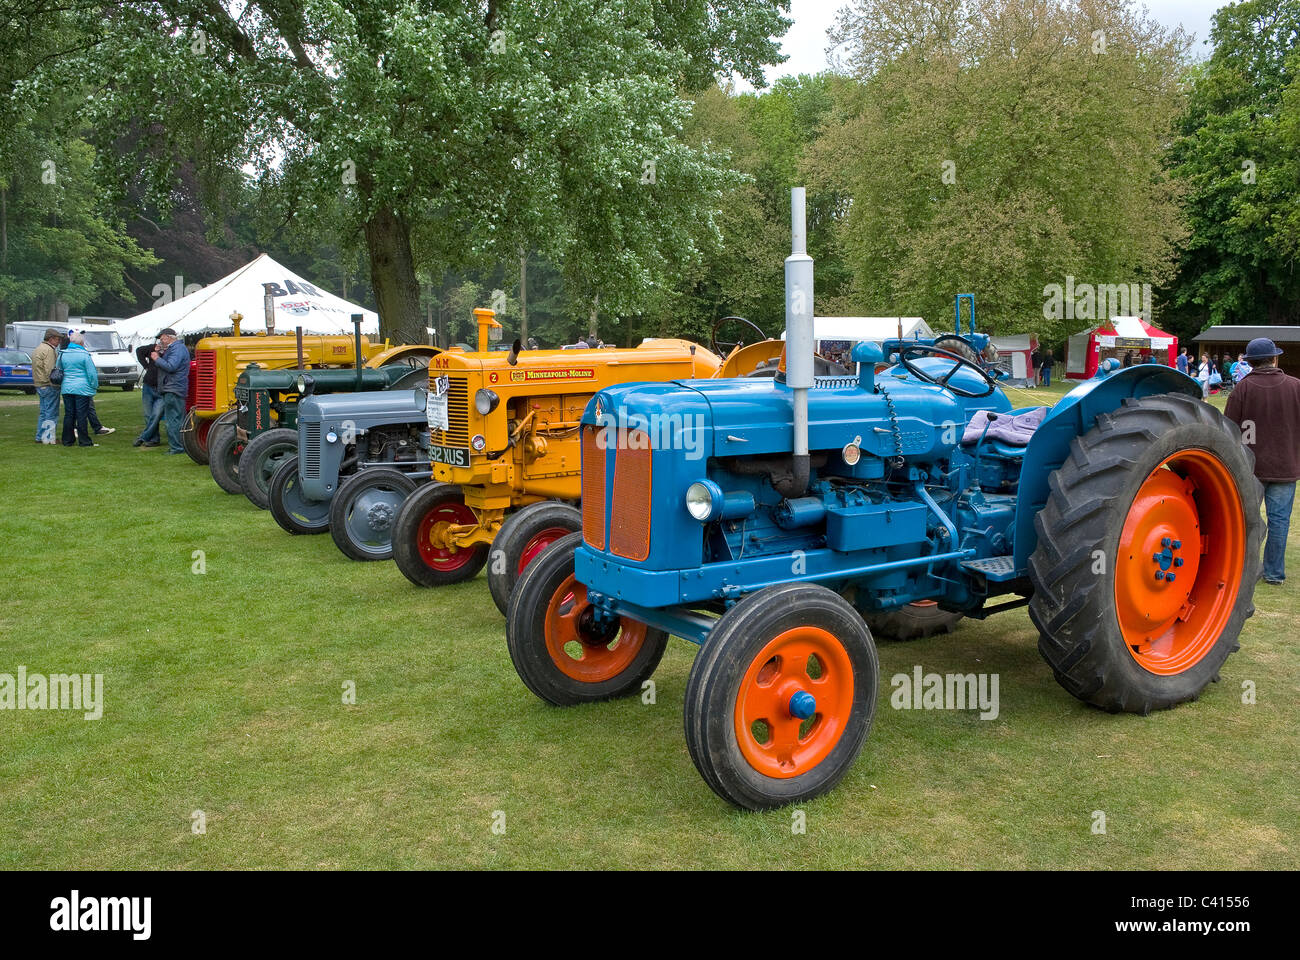 Vintage tractors exhibited at a country show. Stock Photo